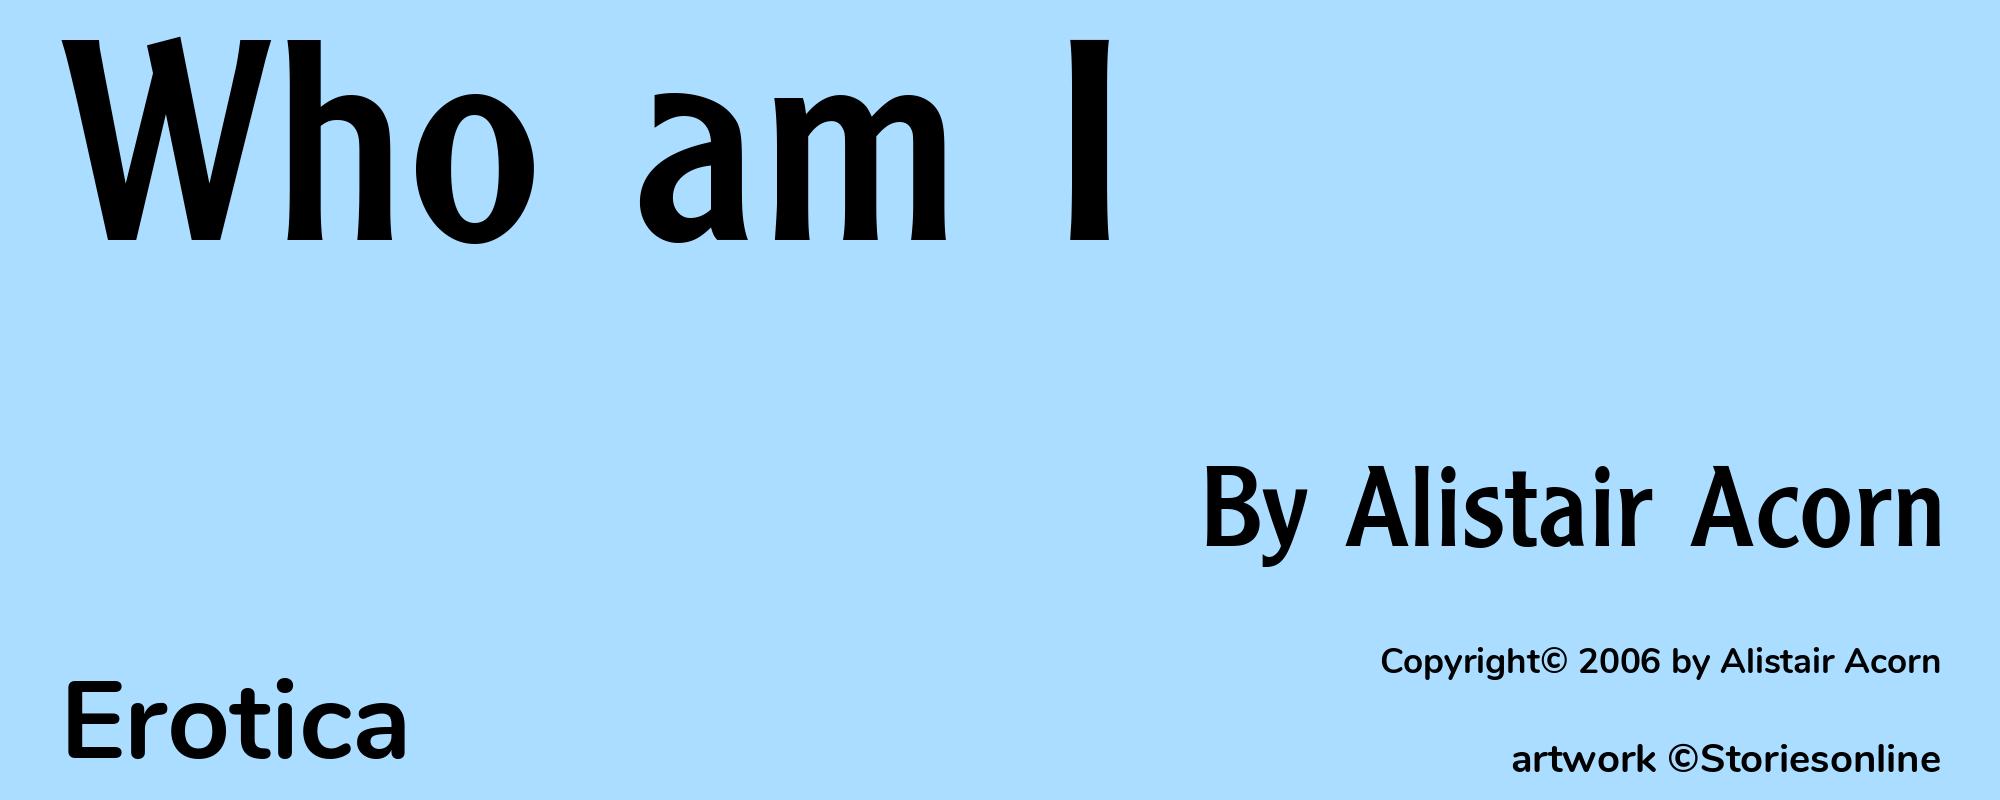 Who am I - Cover